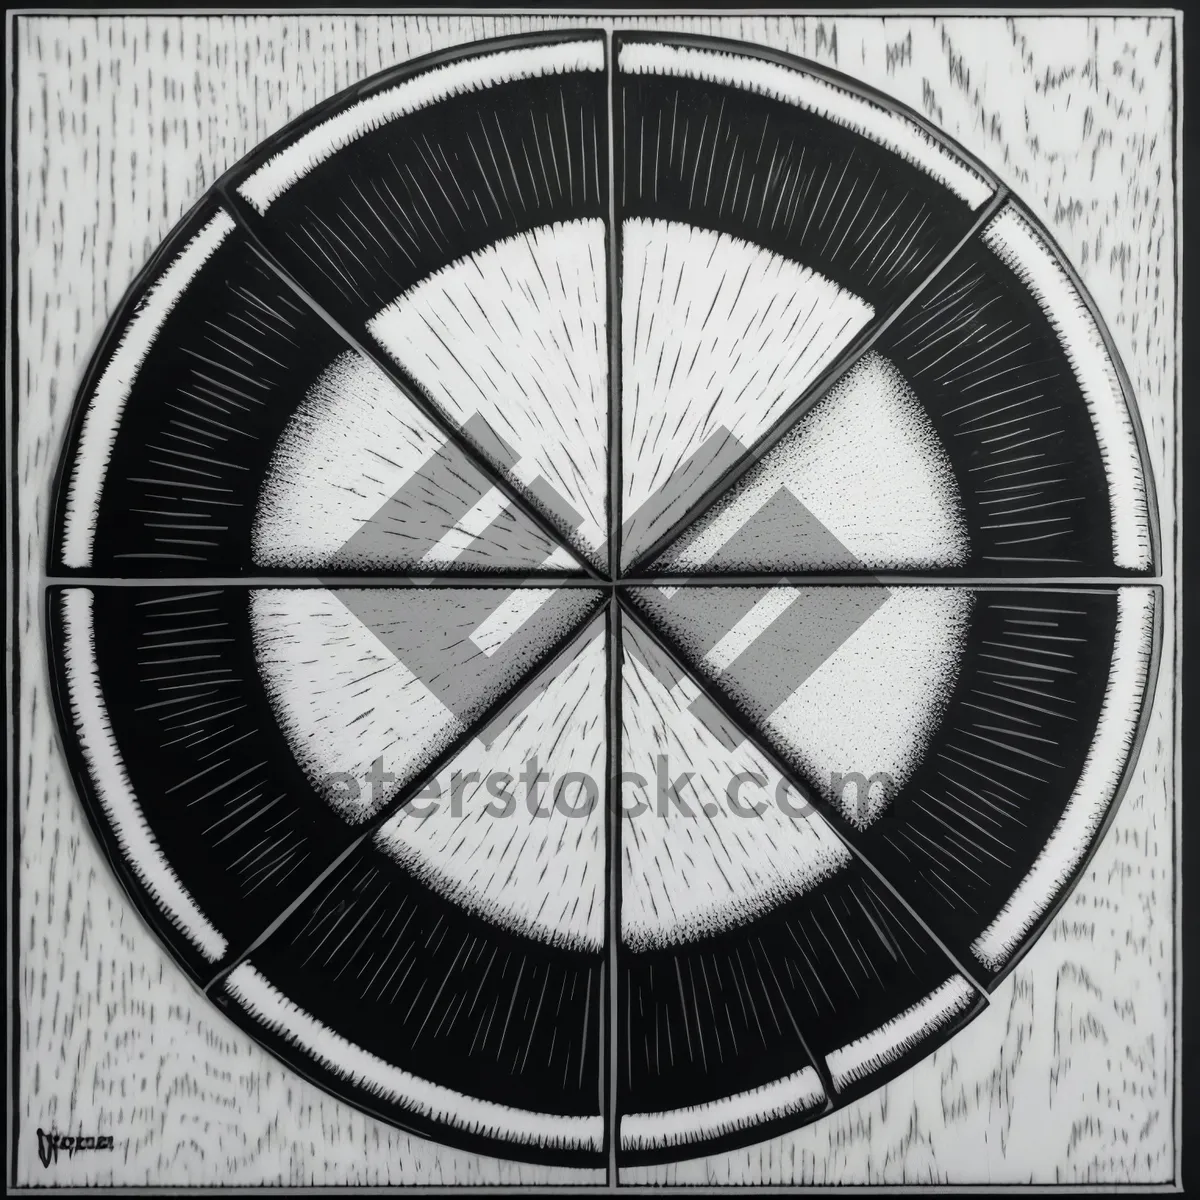 Picture of Vintage Electric Fan and Compass on Wooden Spoke